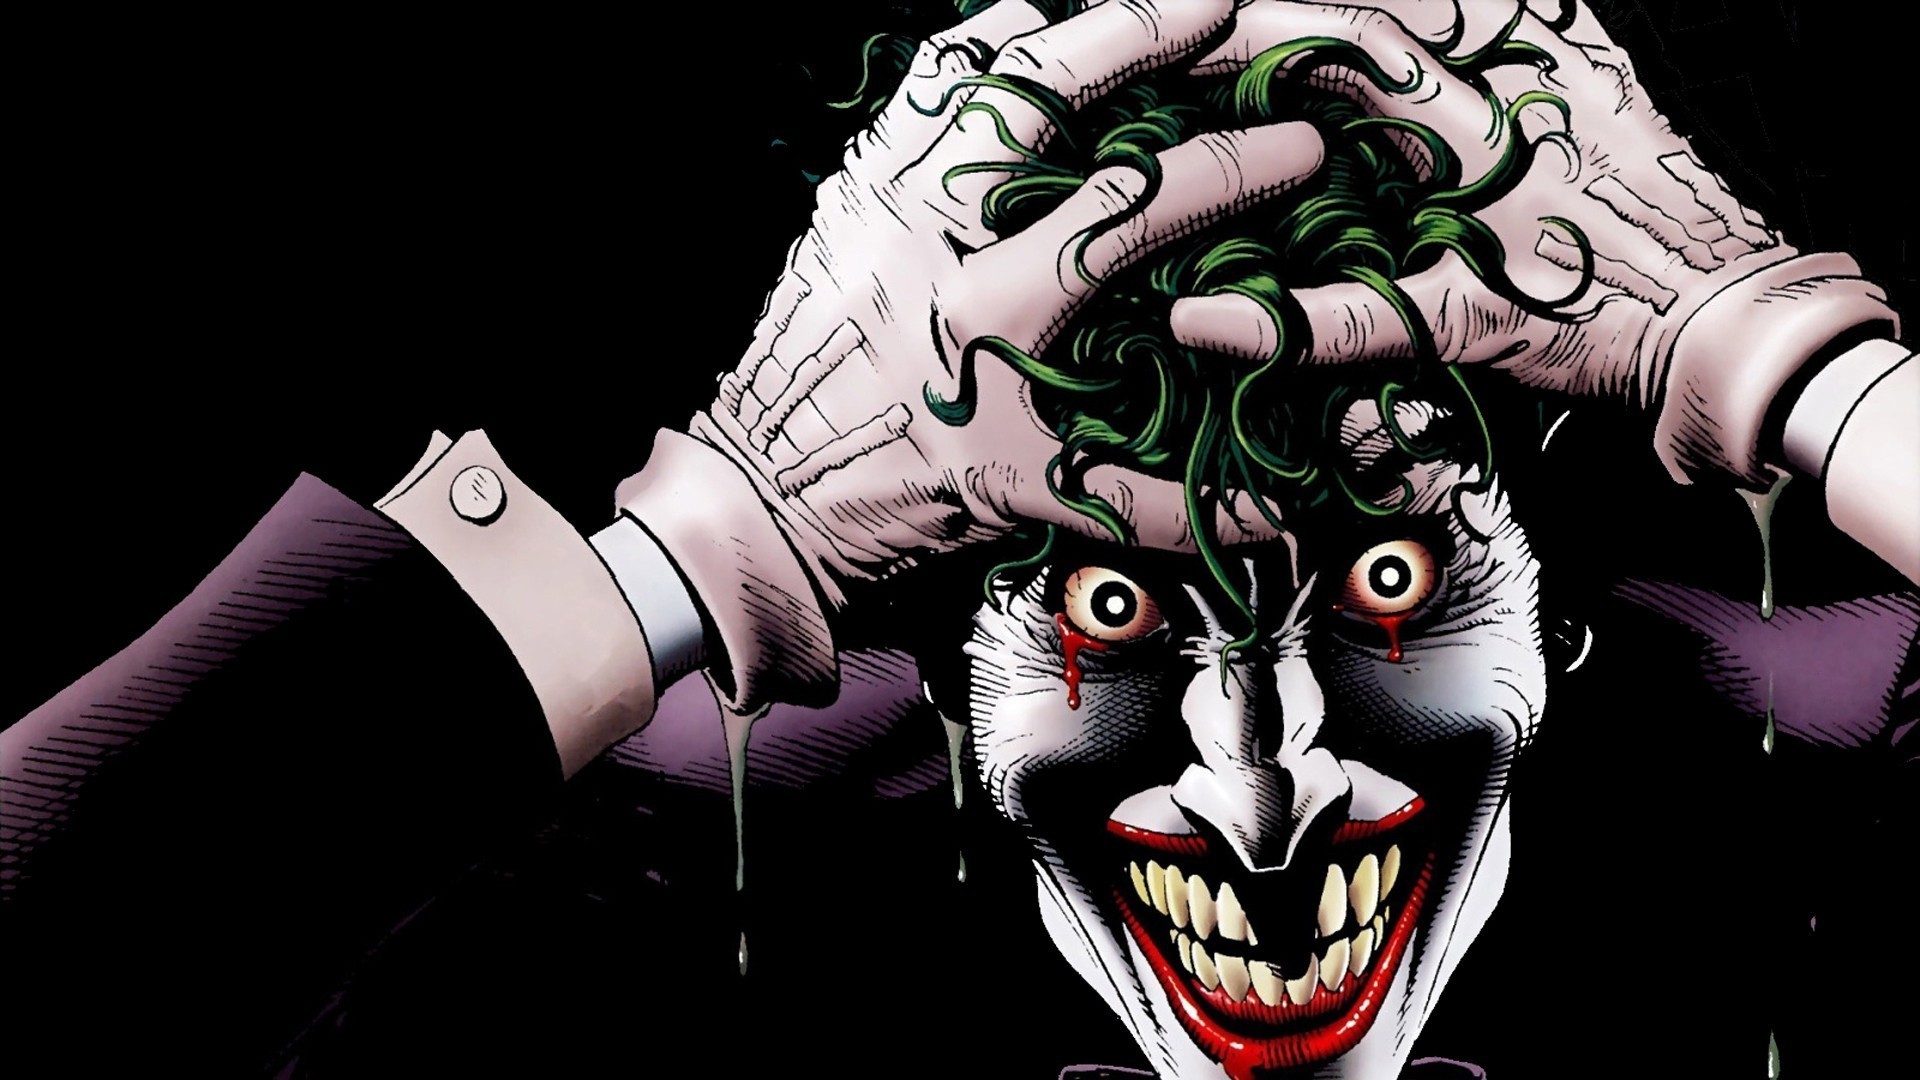 1920x1080 Scary Clown Wallpapers HD Download Scary Clown Wallpapers HD .